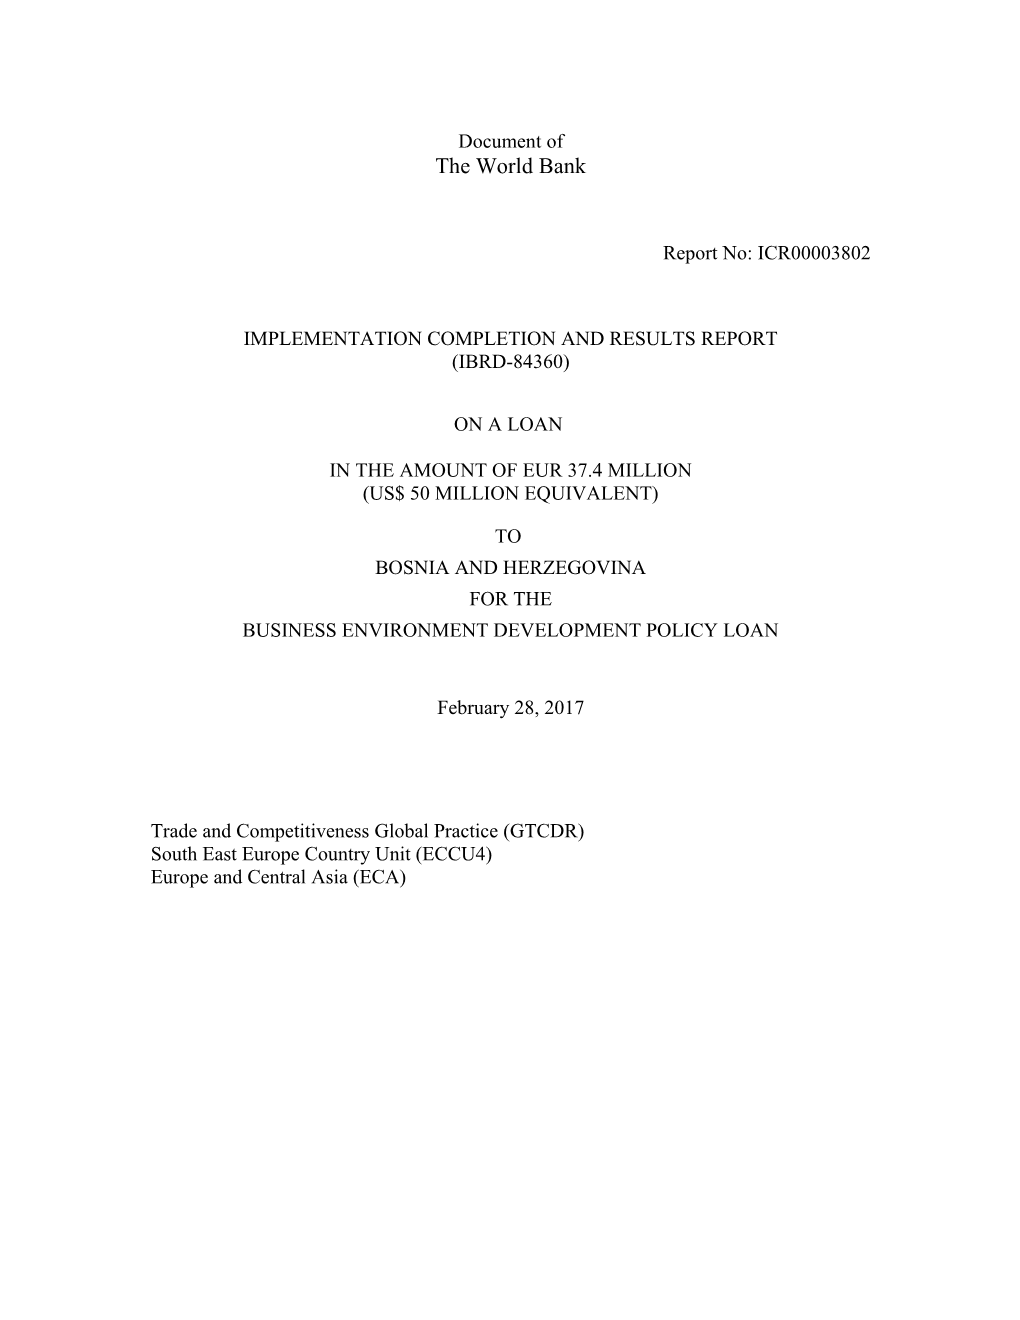 Bosnia and Herzegovina - Business Environment Development Policy Loan - Implementation